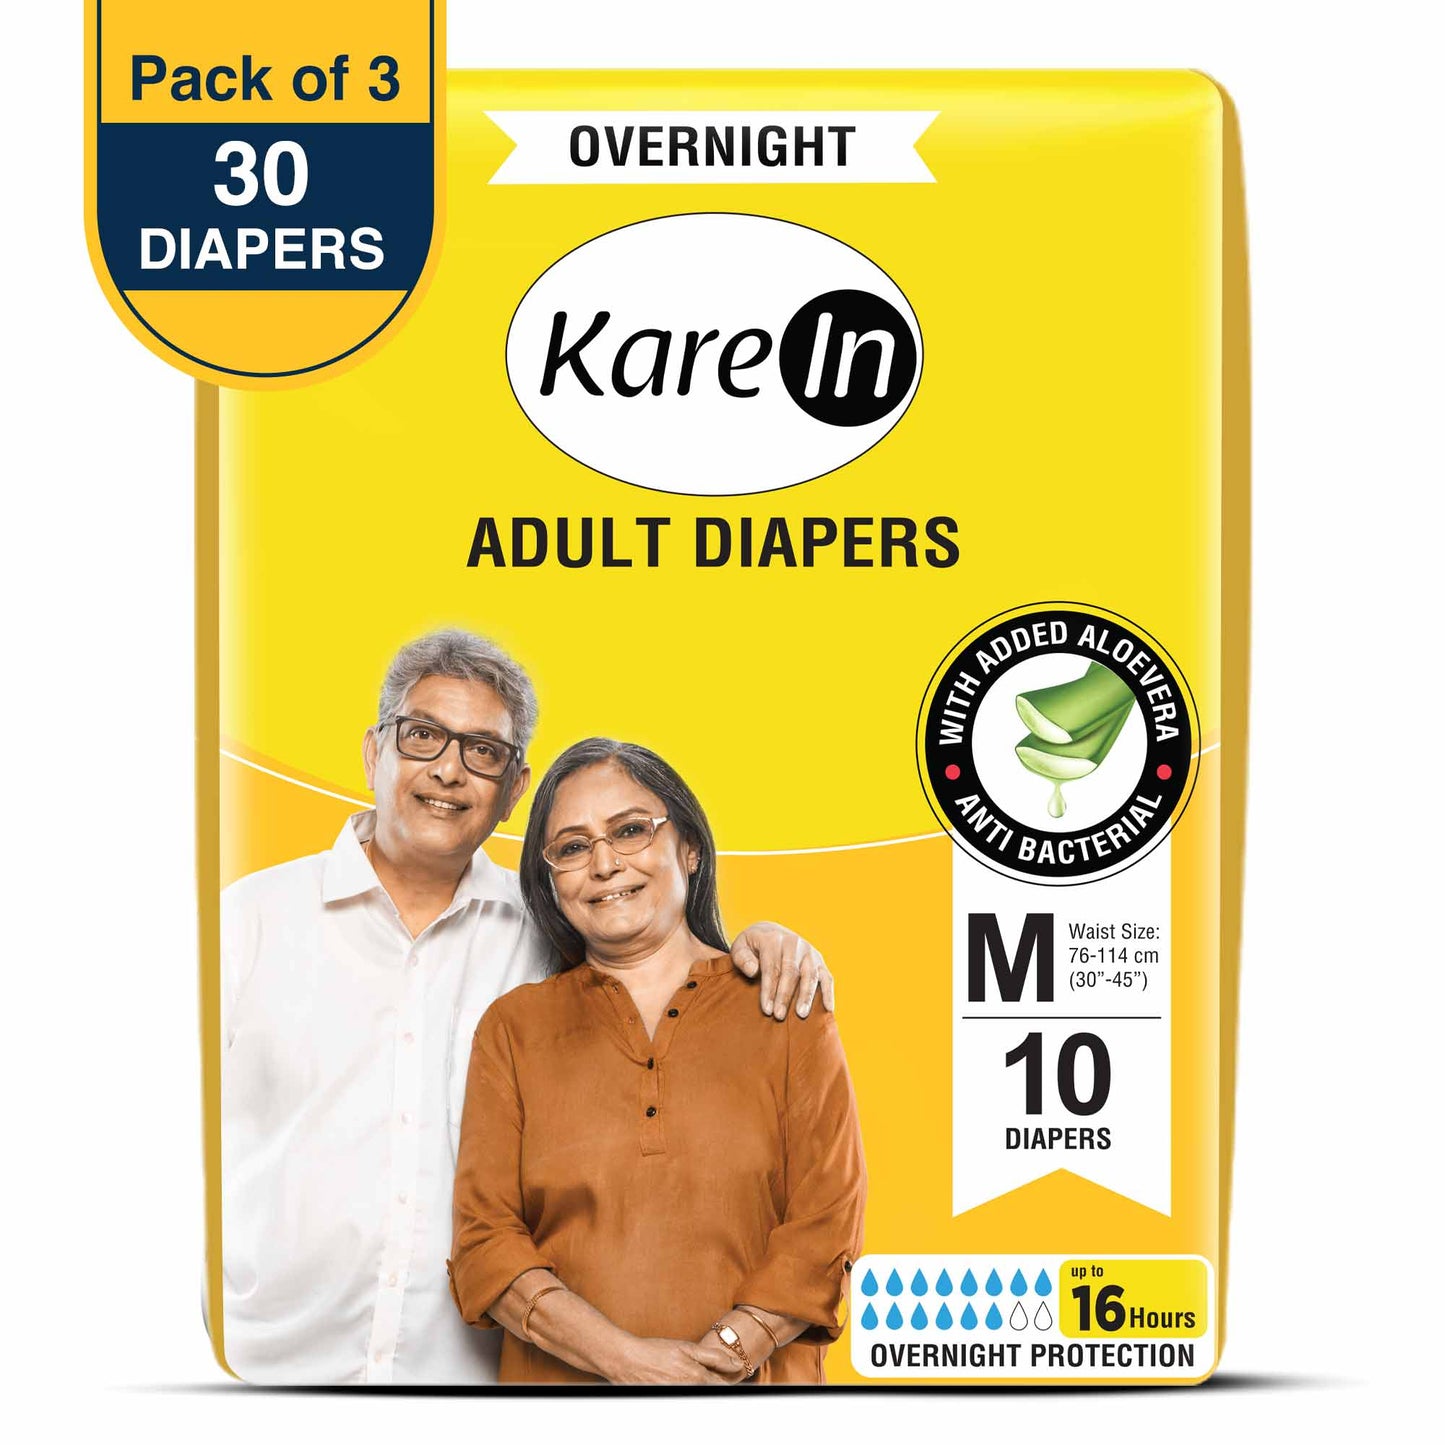 KareIn Overnight Adult Diapers, Medium, Waist Size 76-114 Cm (30"- 45"), Tape Style, High Absorbency, Odour Free, With Aloe Vera Lotion, Anti-Bacterial, ADL, Leak Proof, Pack of 3, 30 Count